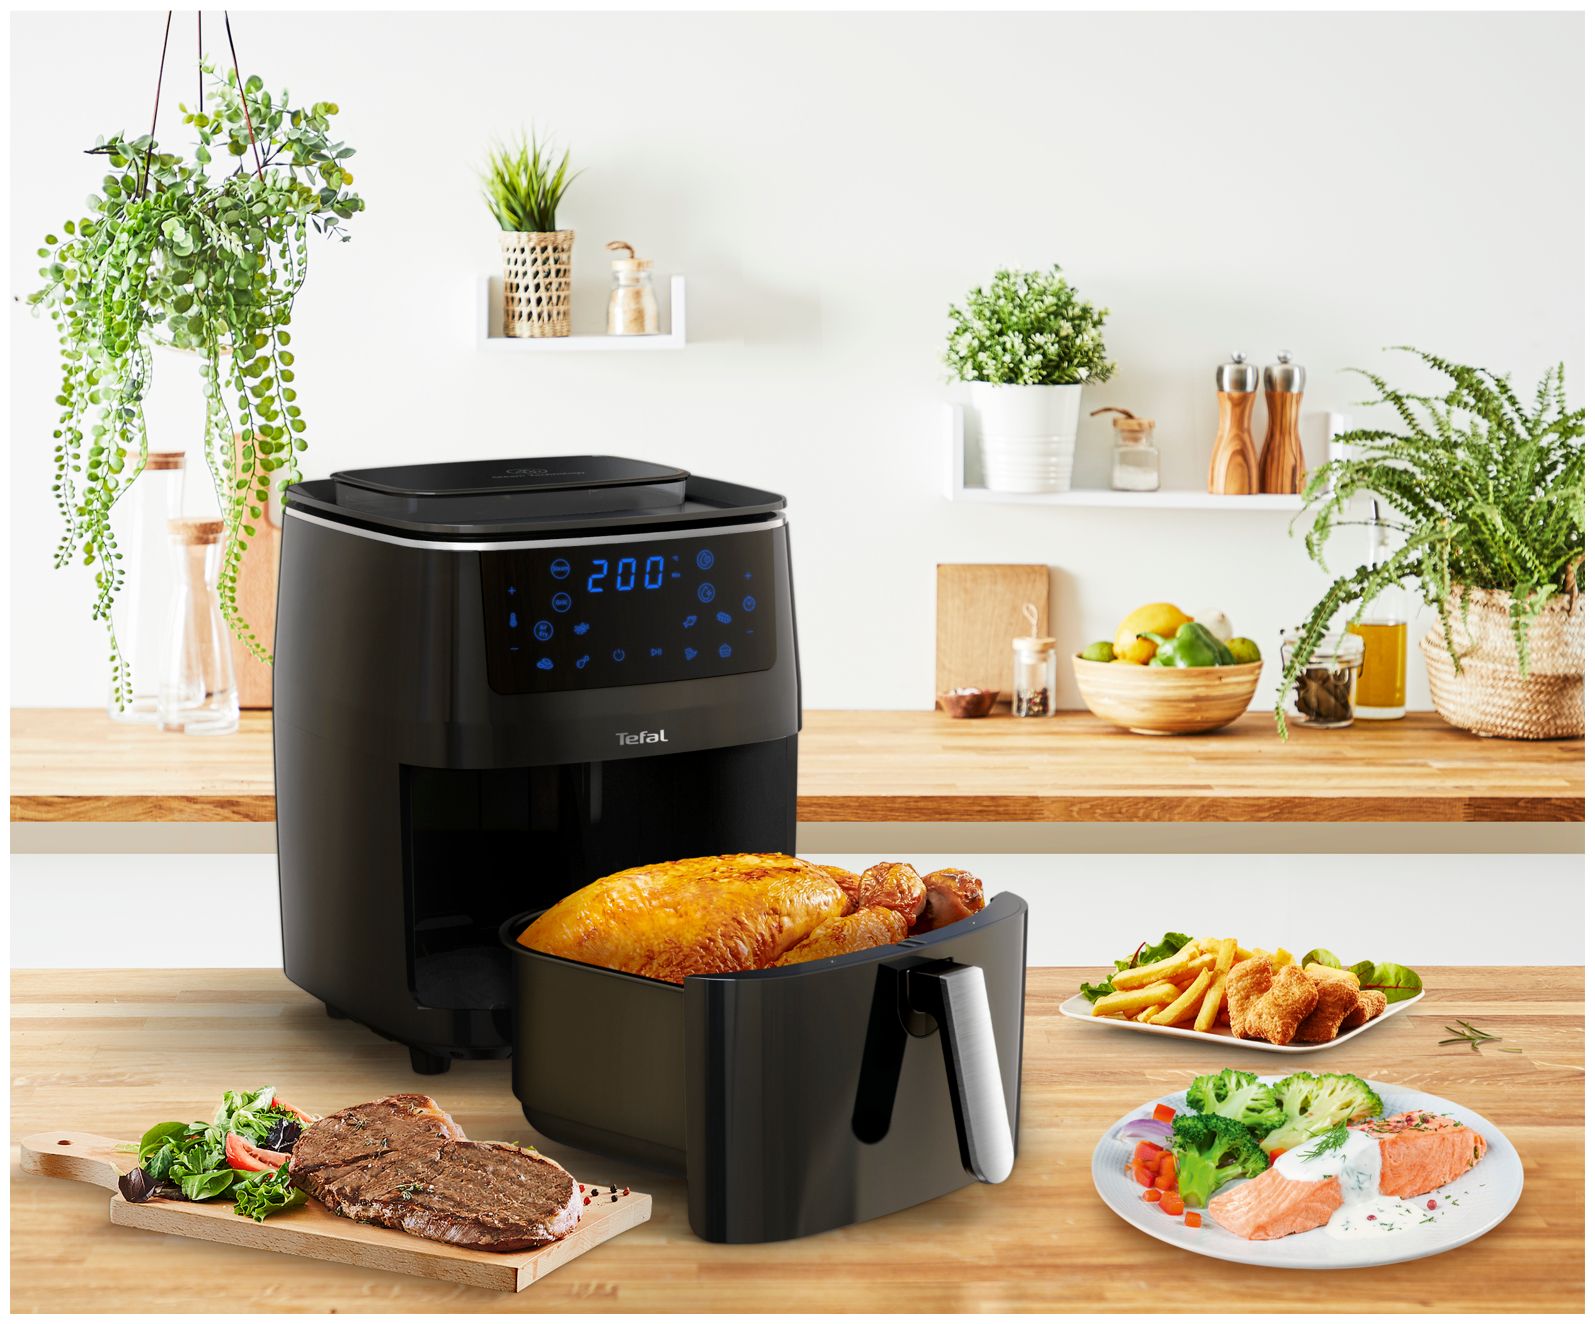 Steam 1700 Fry FW2018 bei Heißluftfritteuse & Grill Easy Tefal W Boomstore